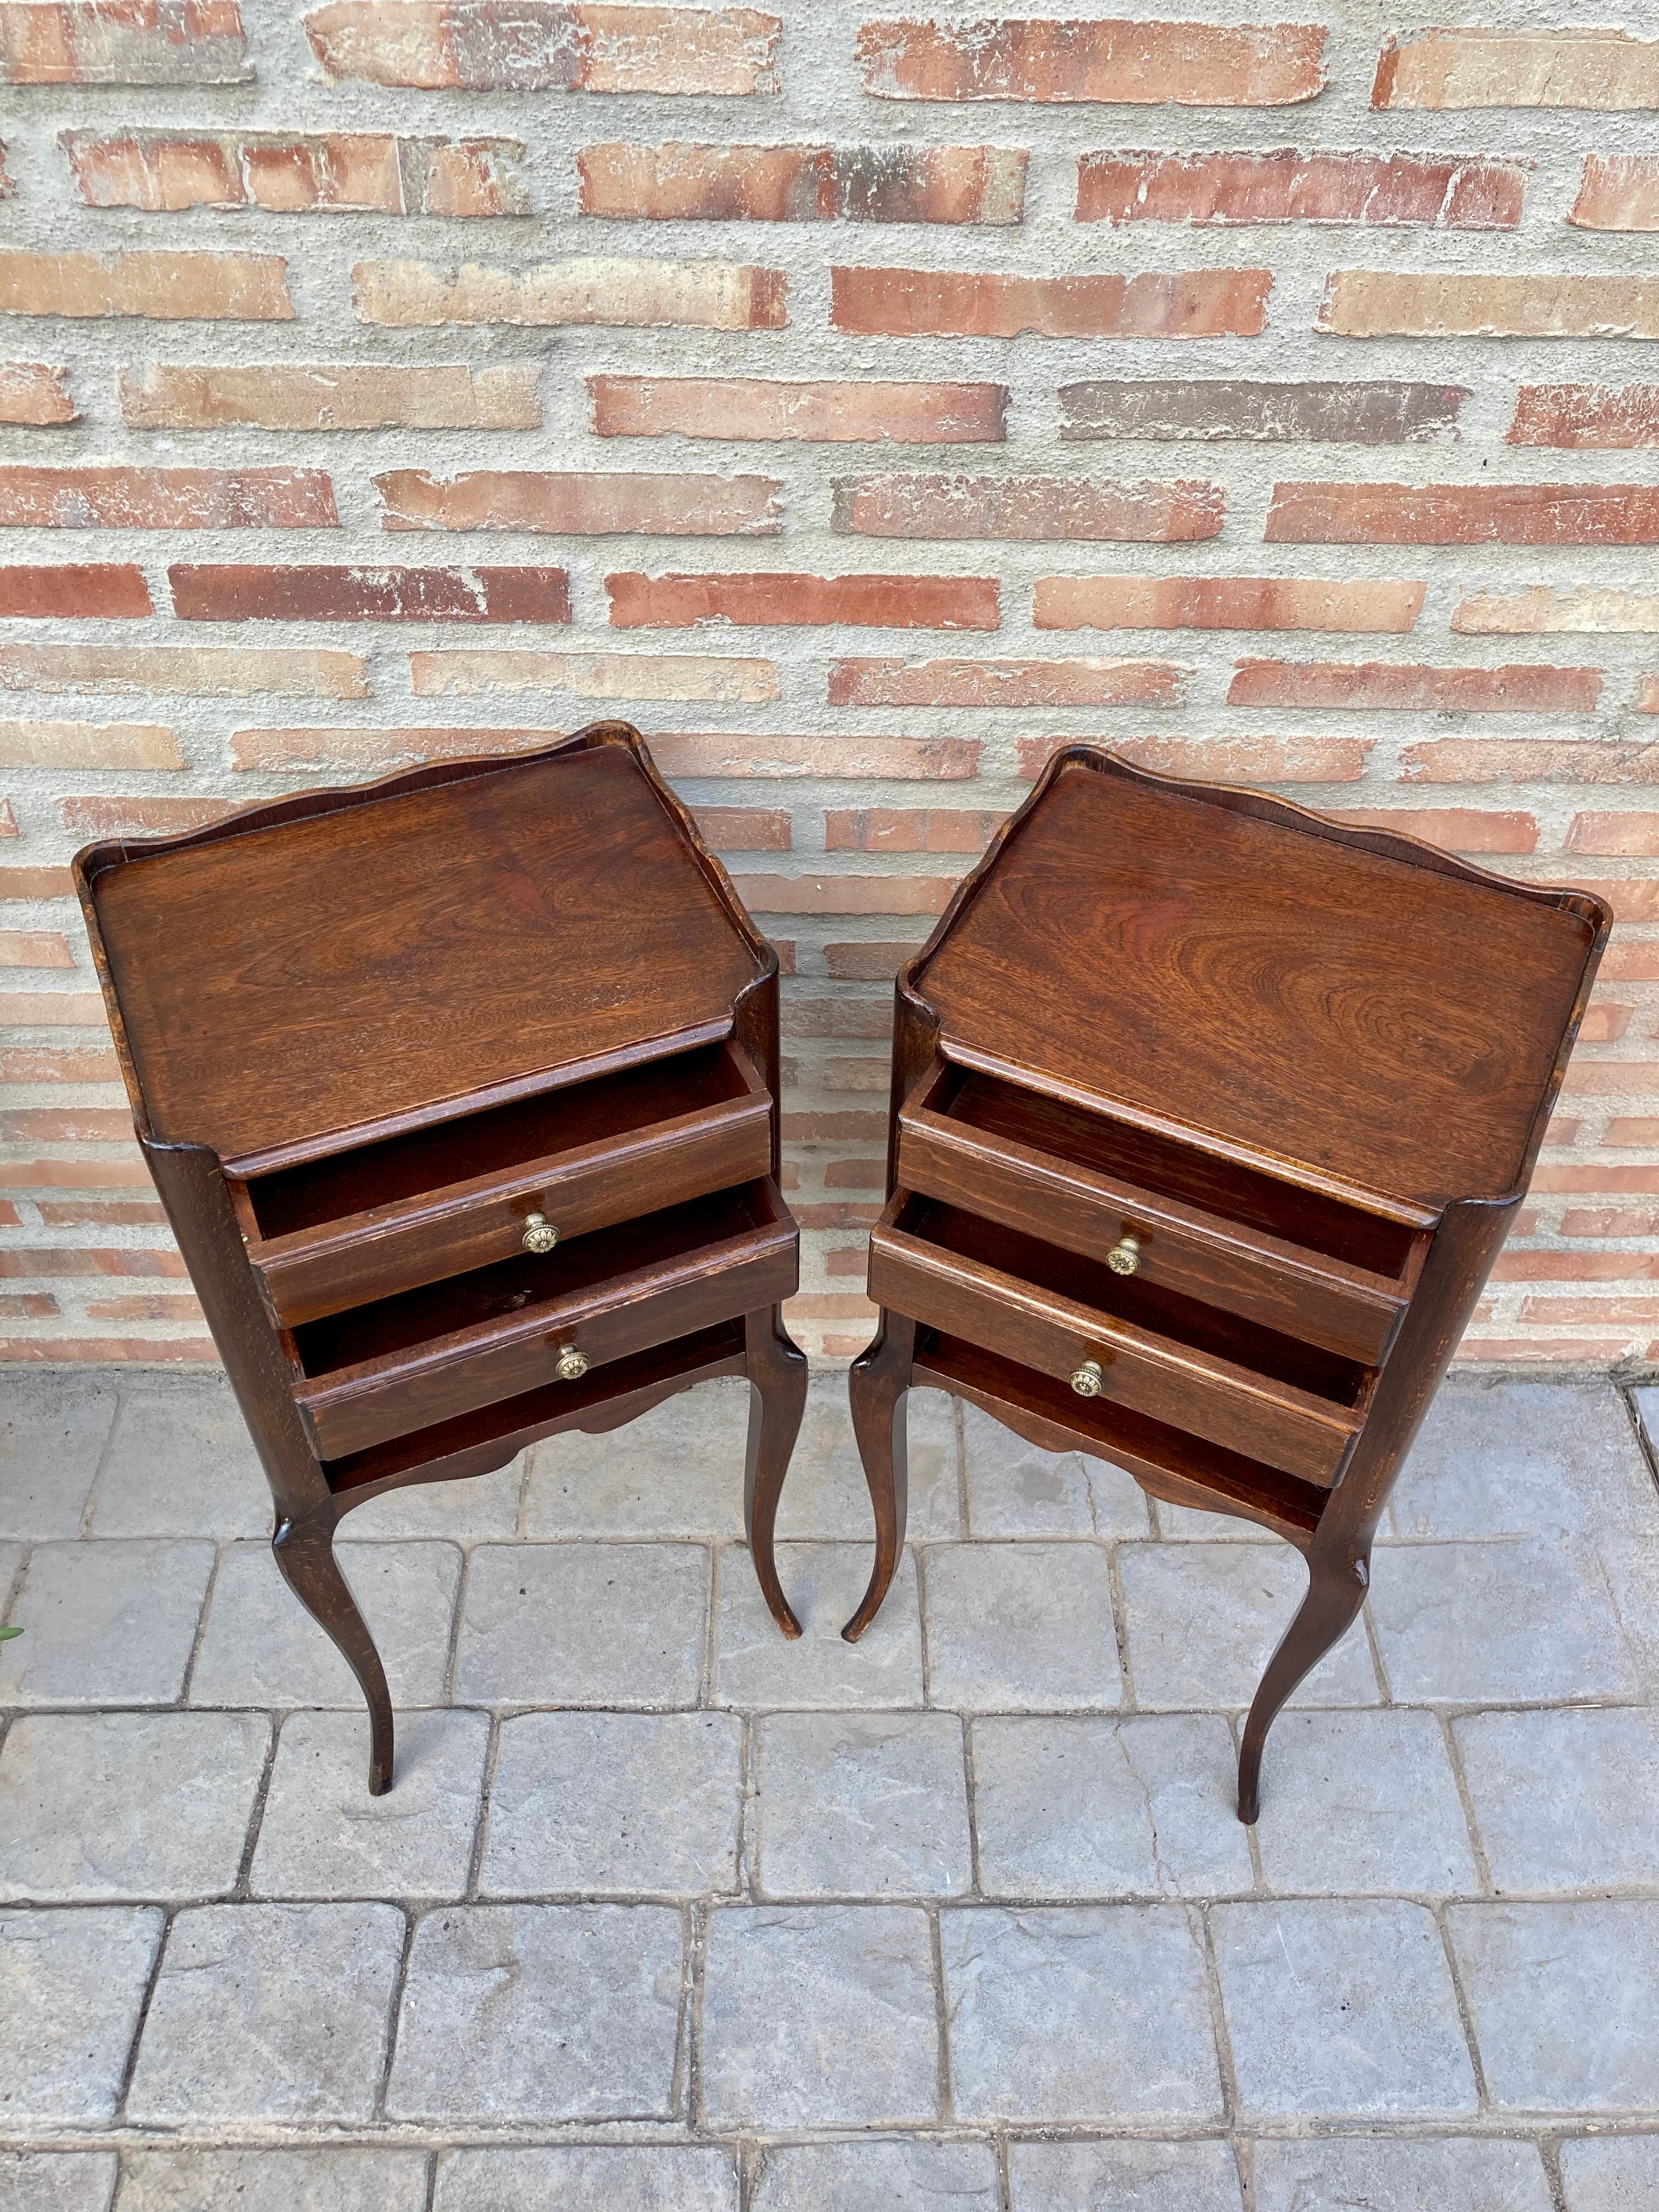 20th Century French Oak Nightstands with 2 Drawers, 1890s, Set of 2 For Sale